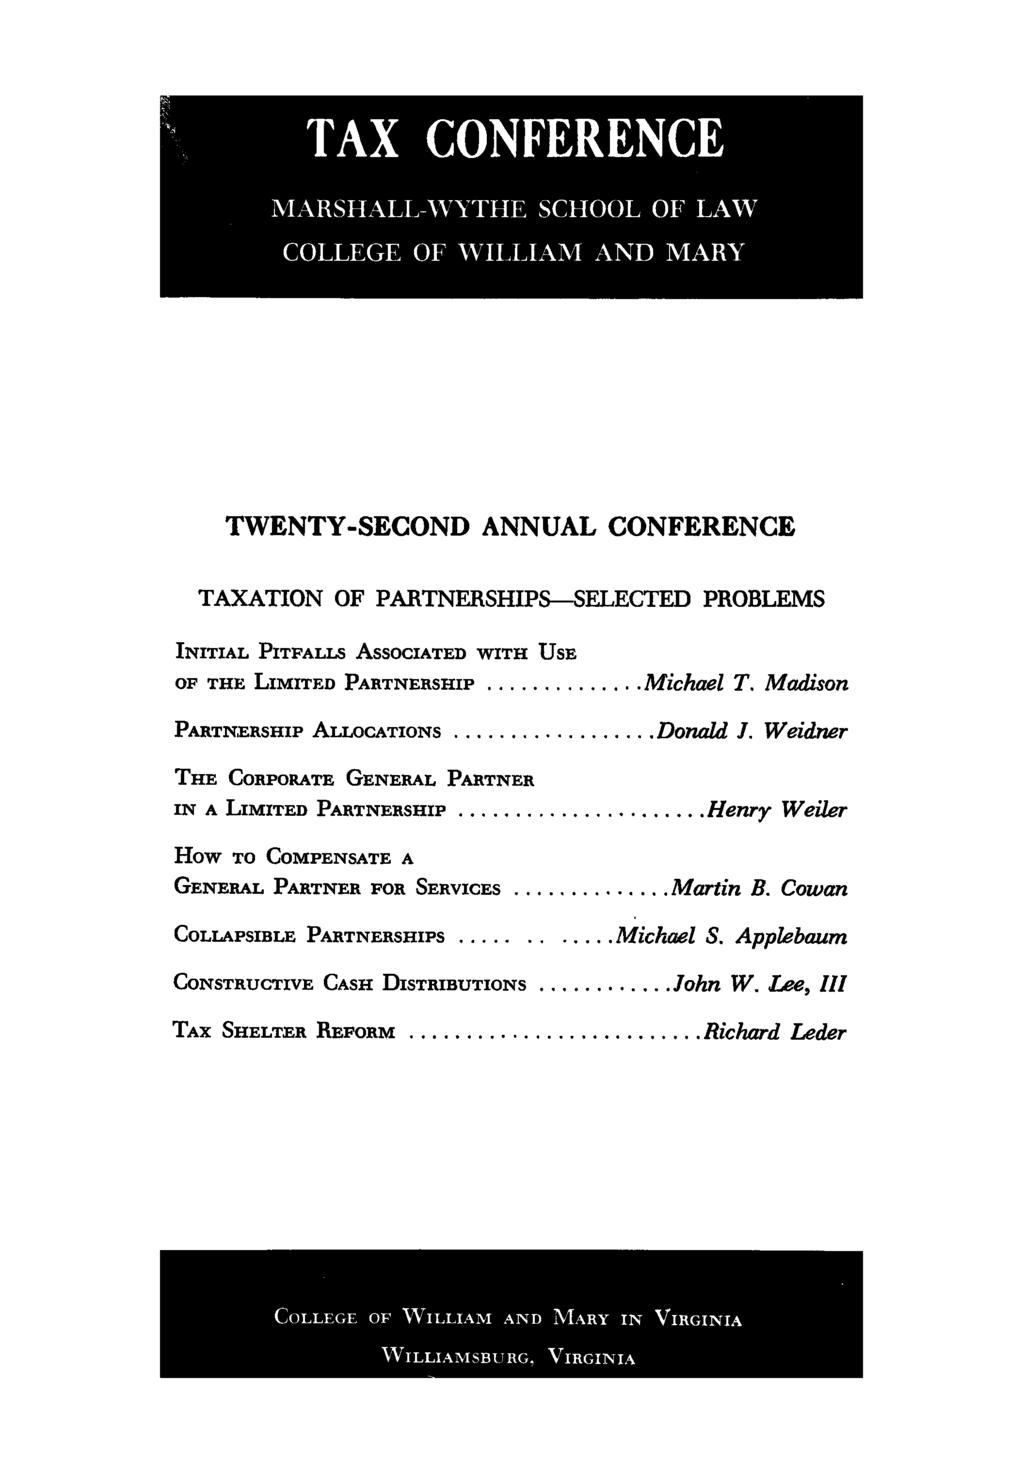 TAX CONFERENCE MARSHALL-WYTHE SCHOOL OF LAW COLLEGE OF WHAAAM AND MARY TWENTY-SECOND ANNUAL CONFERENCE TAXATION OF PARTNERSHIPS-SELECTED PROBLEMS INITIAL PITFALLS ASSOCIATED WITH USE OF THE LIMITED